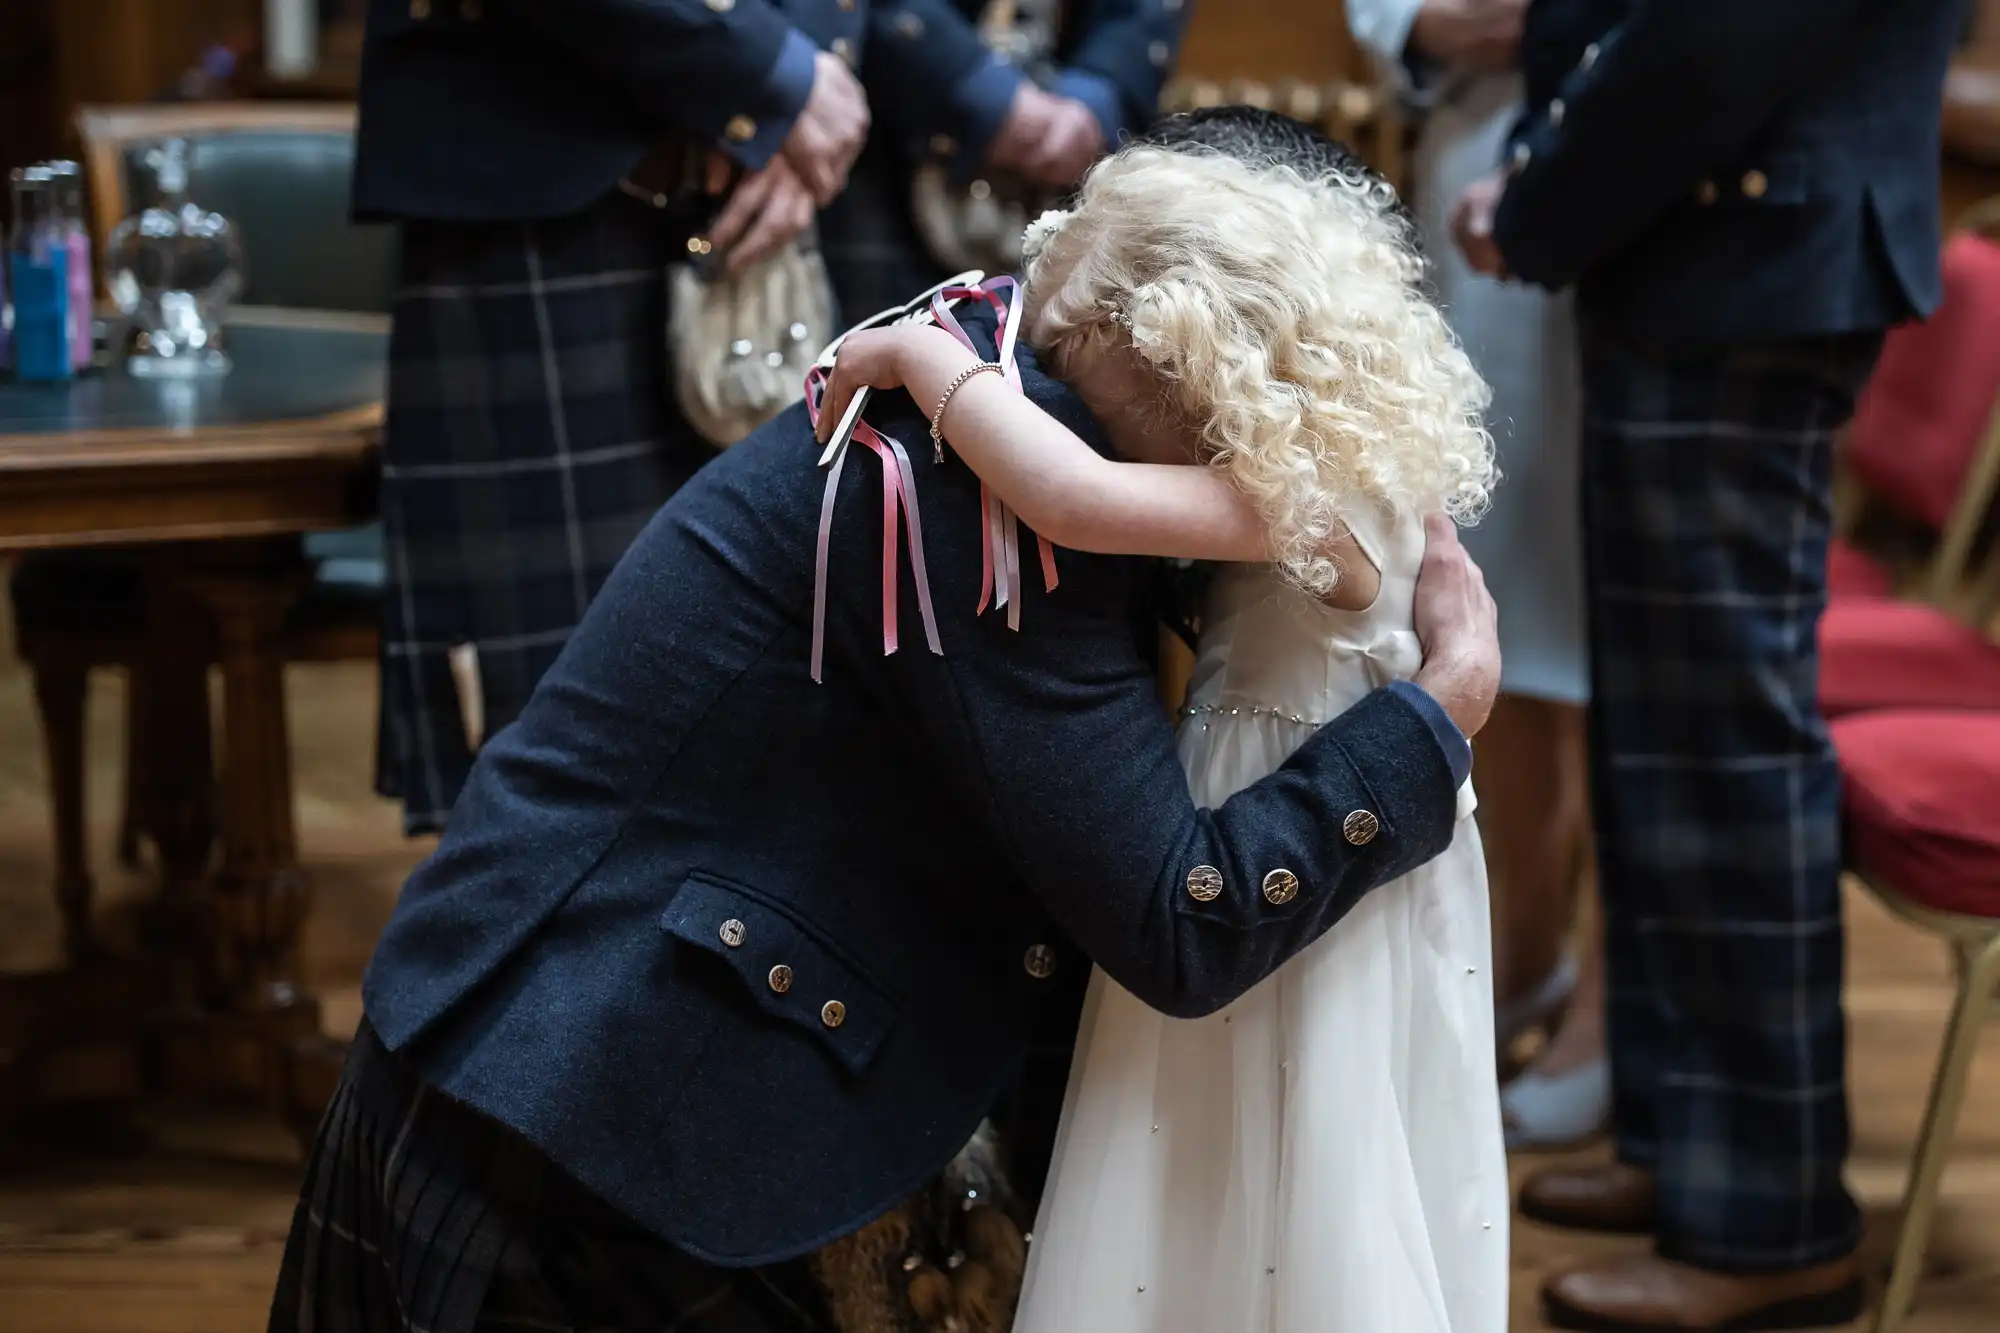 A man in traditional Scottish attire hugs a young girl with curly blonde hair during an event.